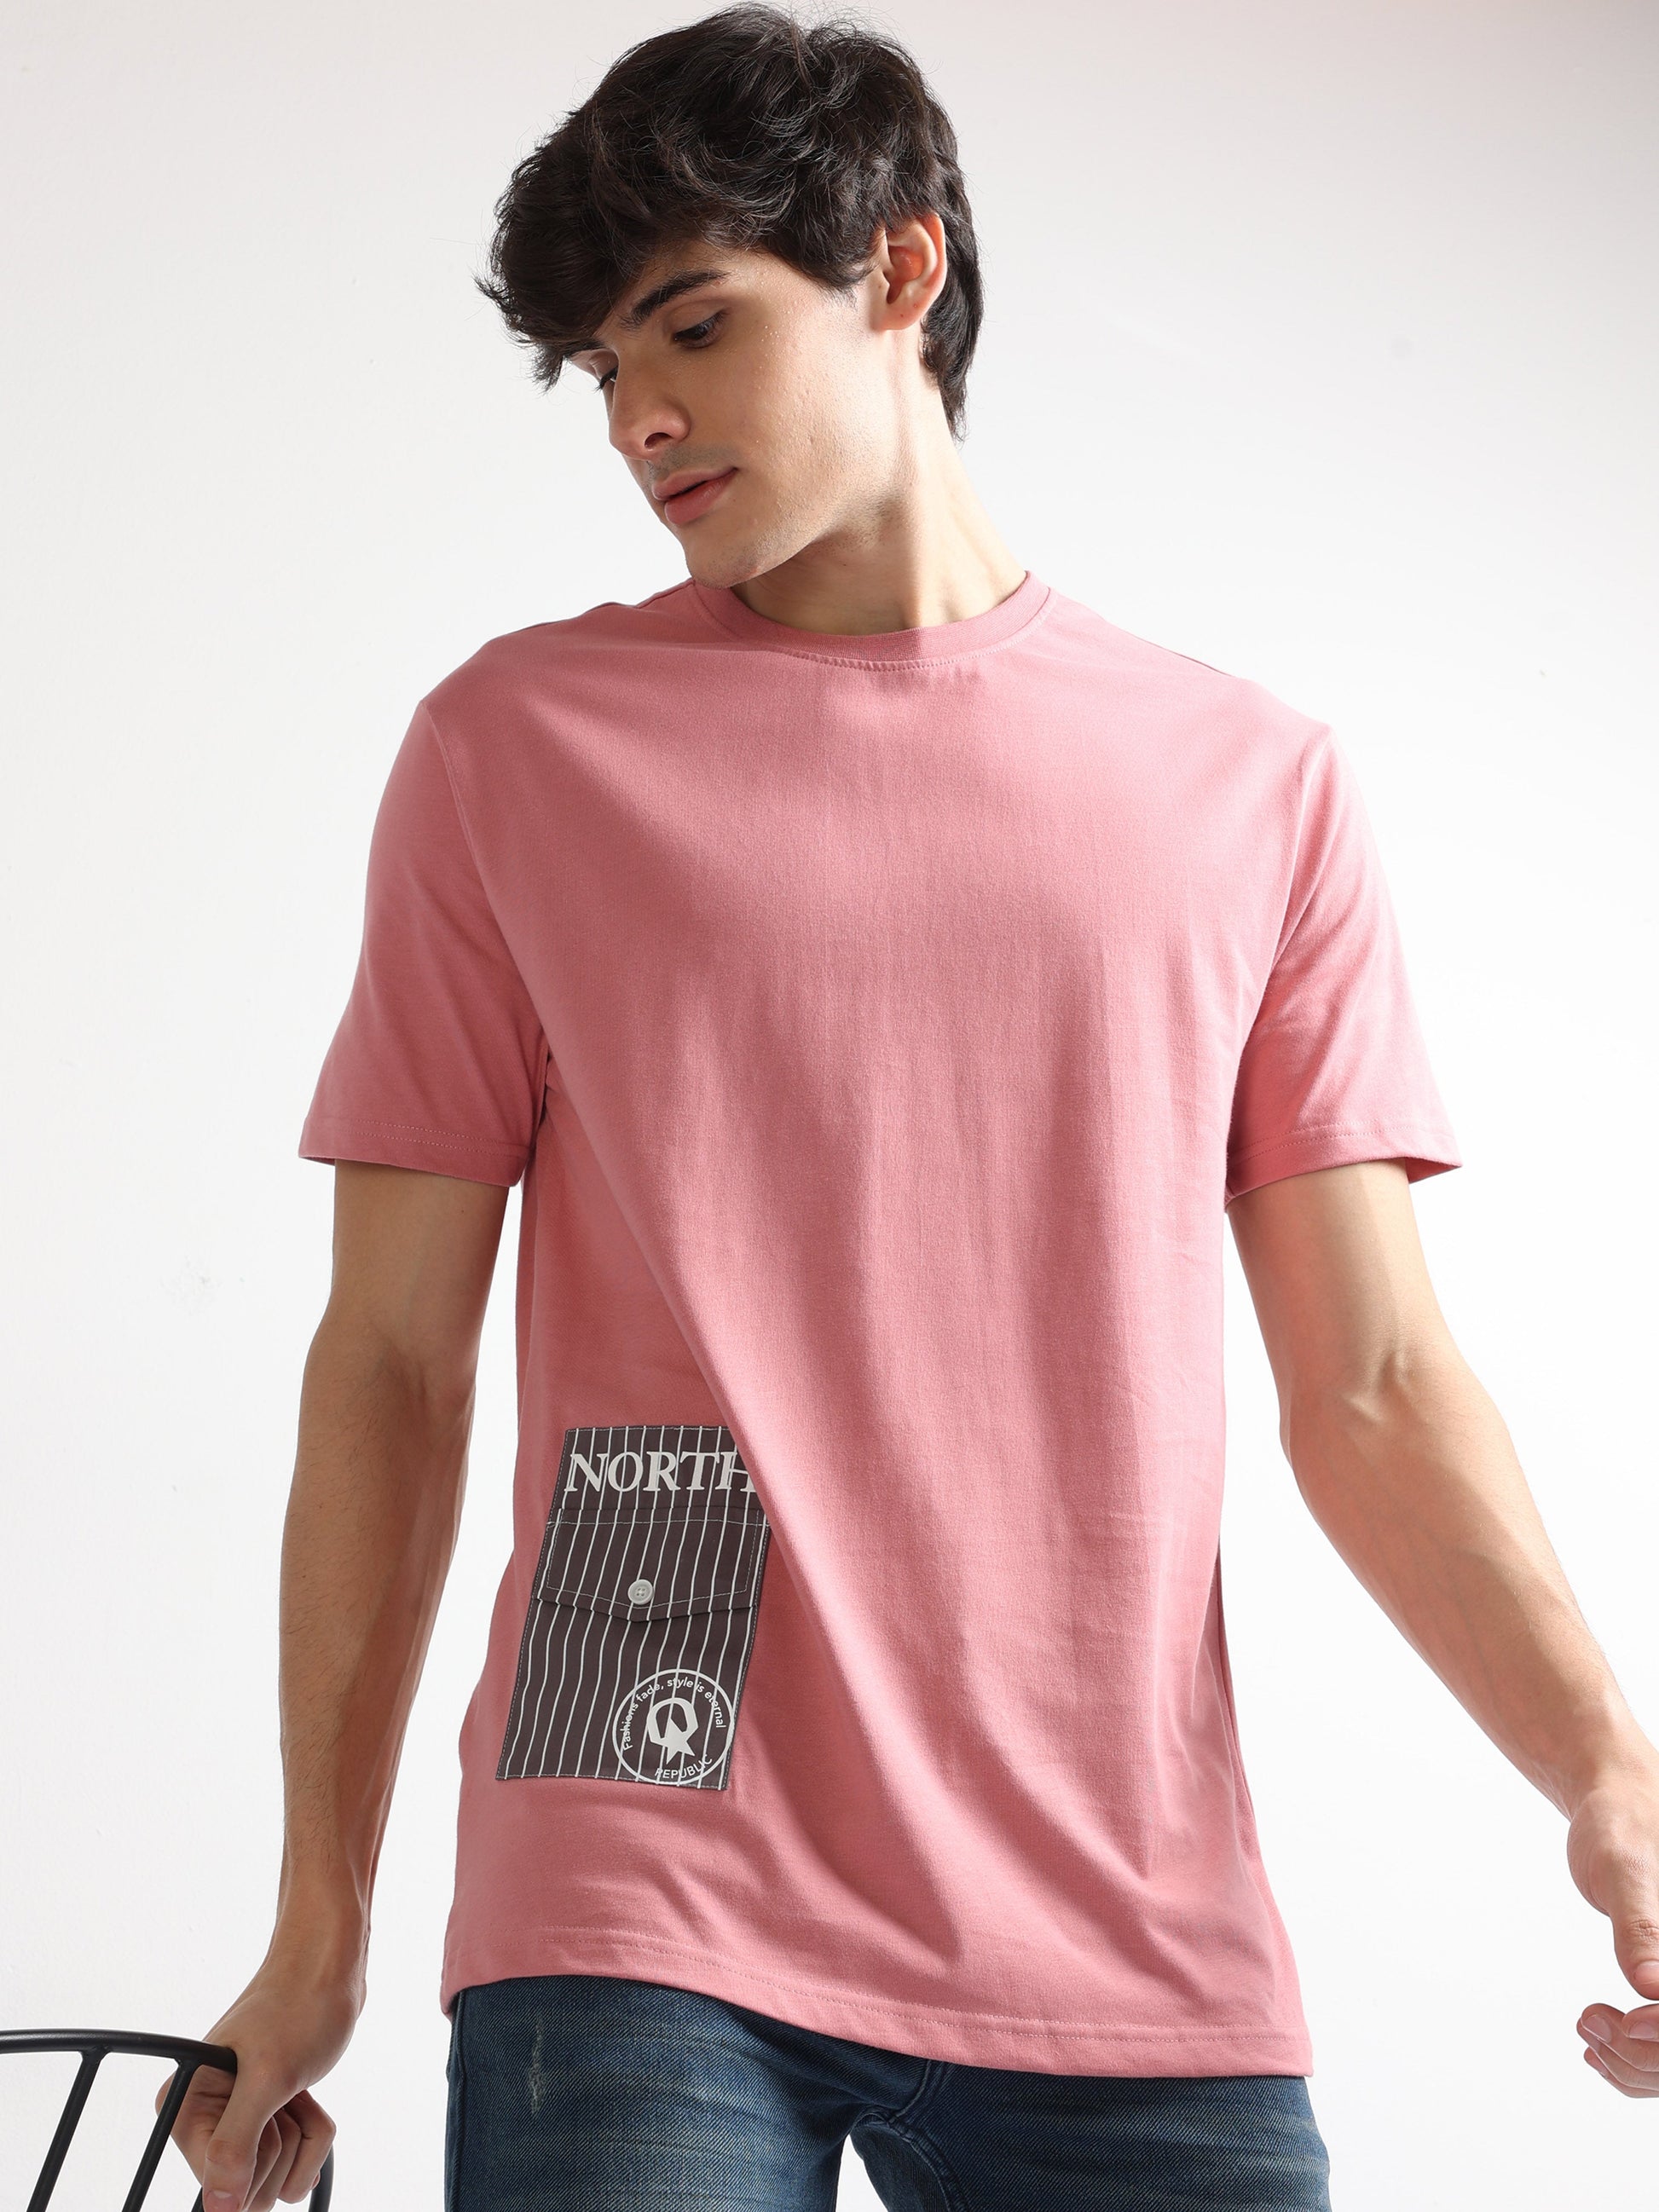 Buy Crew Neck Fashion T-Shirt With Pocket Online.